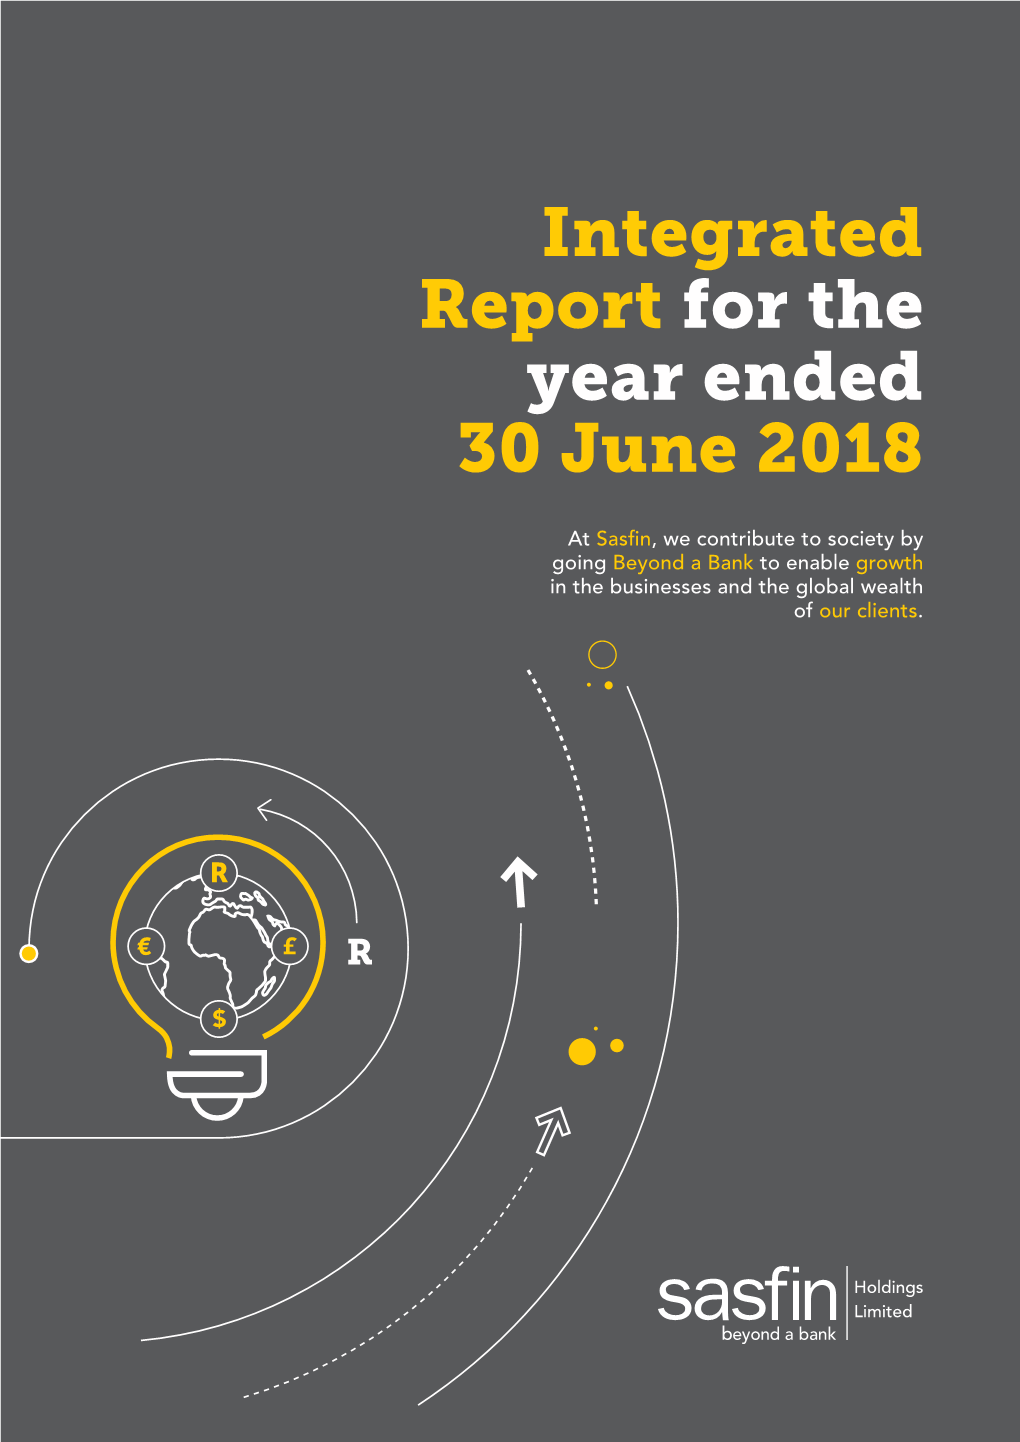 Integrated Report for the Year Ended 30 June 2018